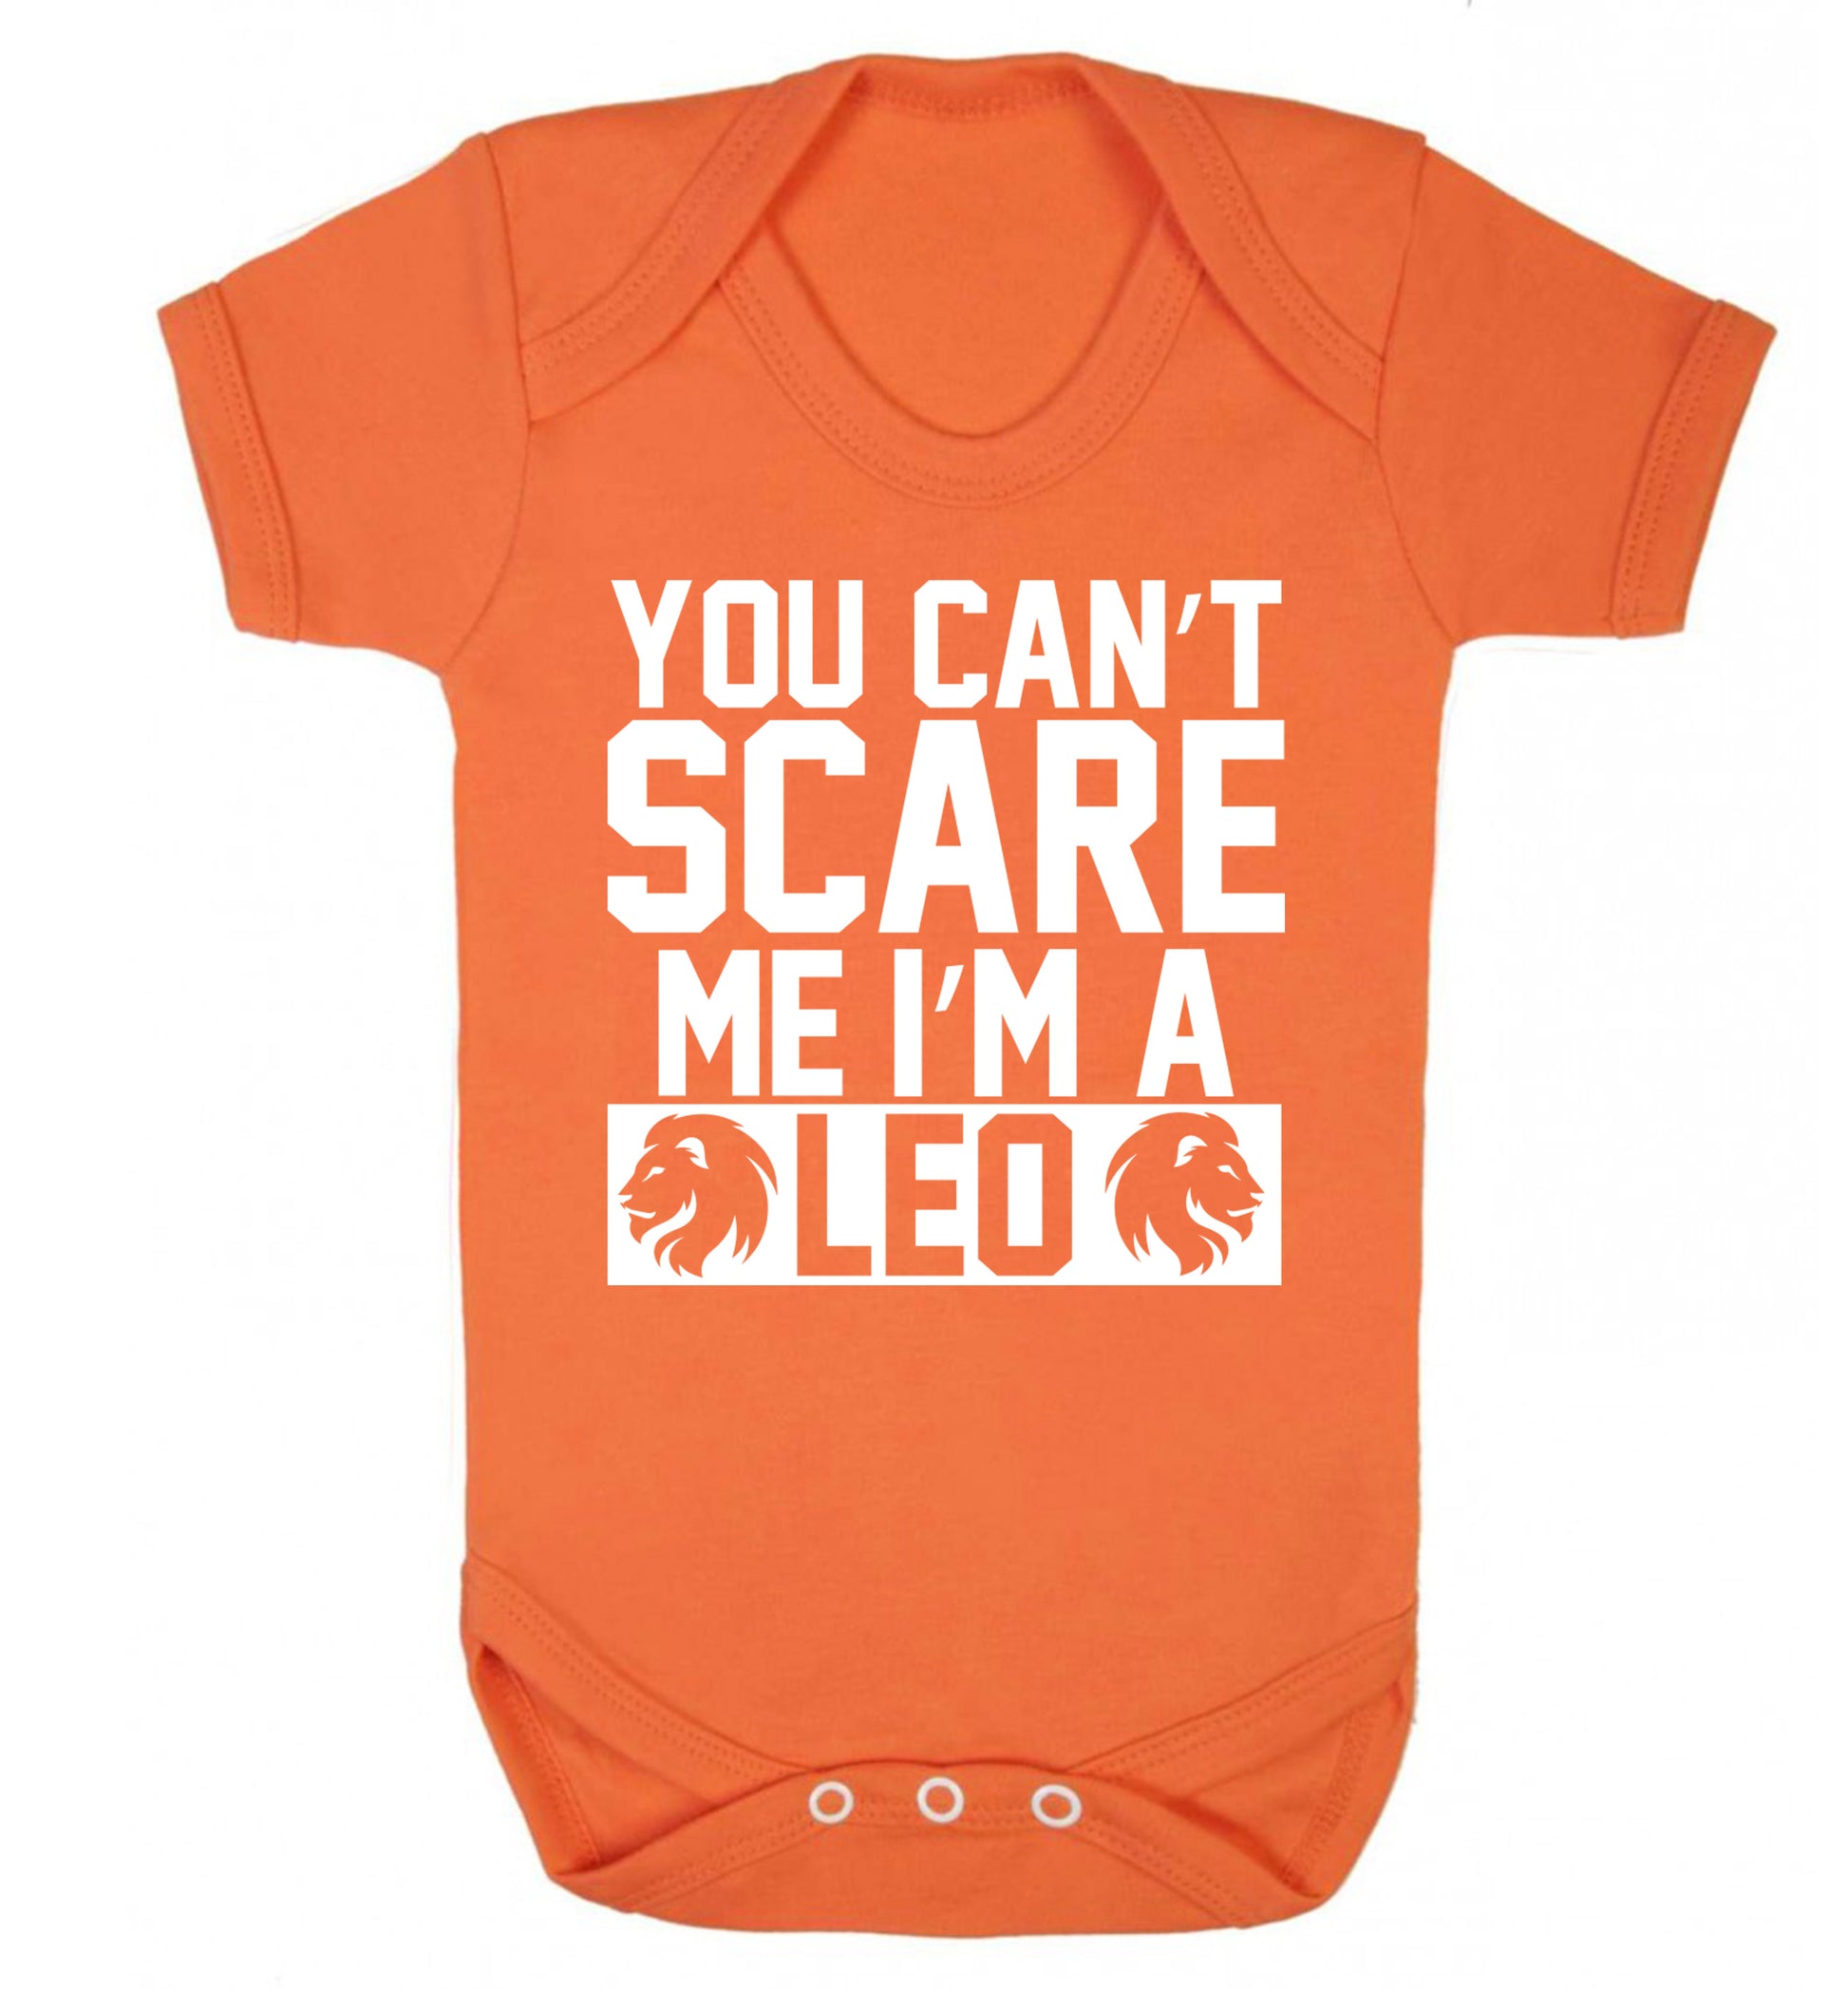 You can't scare me I'm a leo Baby Vest orange 18-24 months